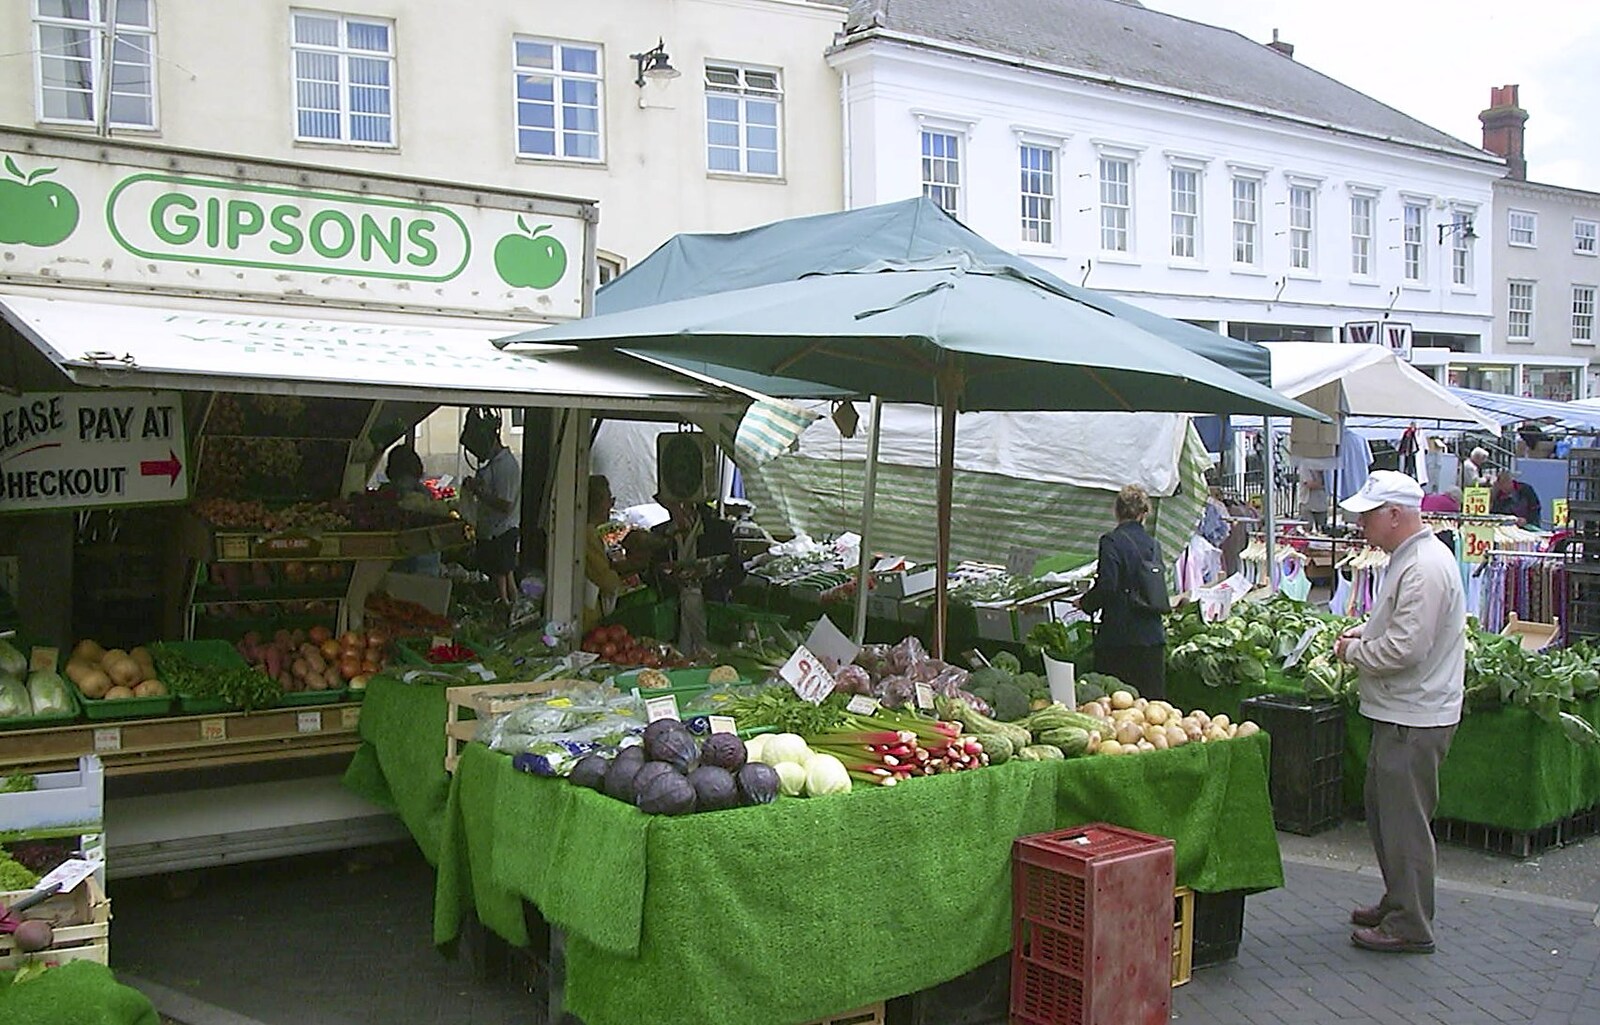 A fruit and veg stall on Diss market from Longview play Revolution Records, Diss, Norfolk - 2nd July 2004